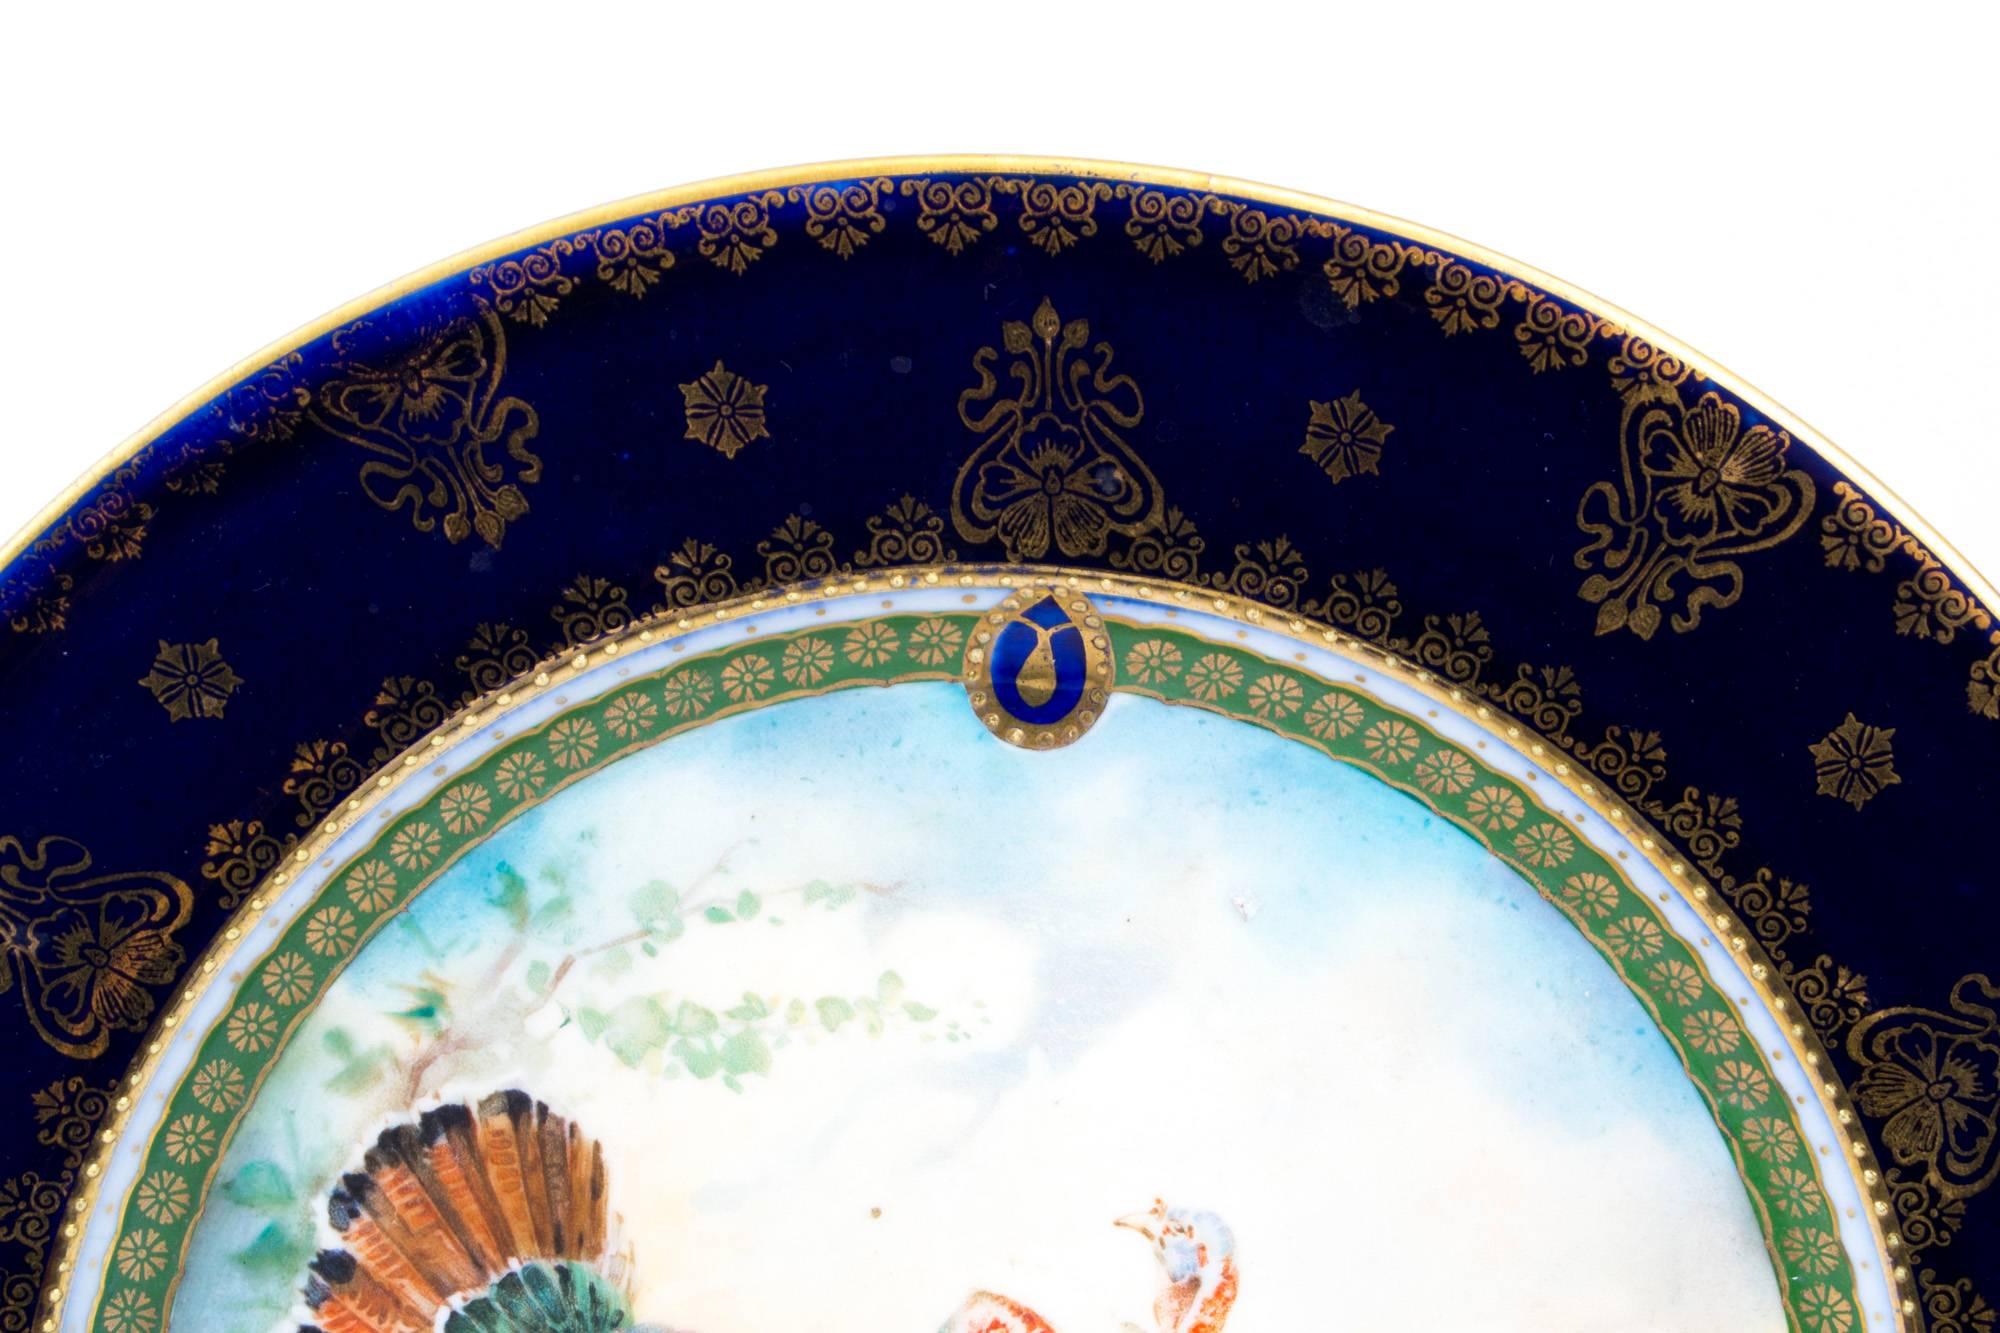 This is a wonderful antique Vienna porcelain cabinet plate, circa 1900 in date.

It is beautifully hand painted with a pair of turkeys in a landscape, and bearing the blue underglaze "beehive" mark.

There is no mistaking the unique